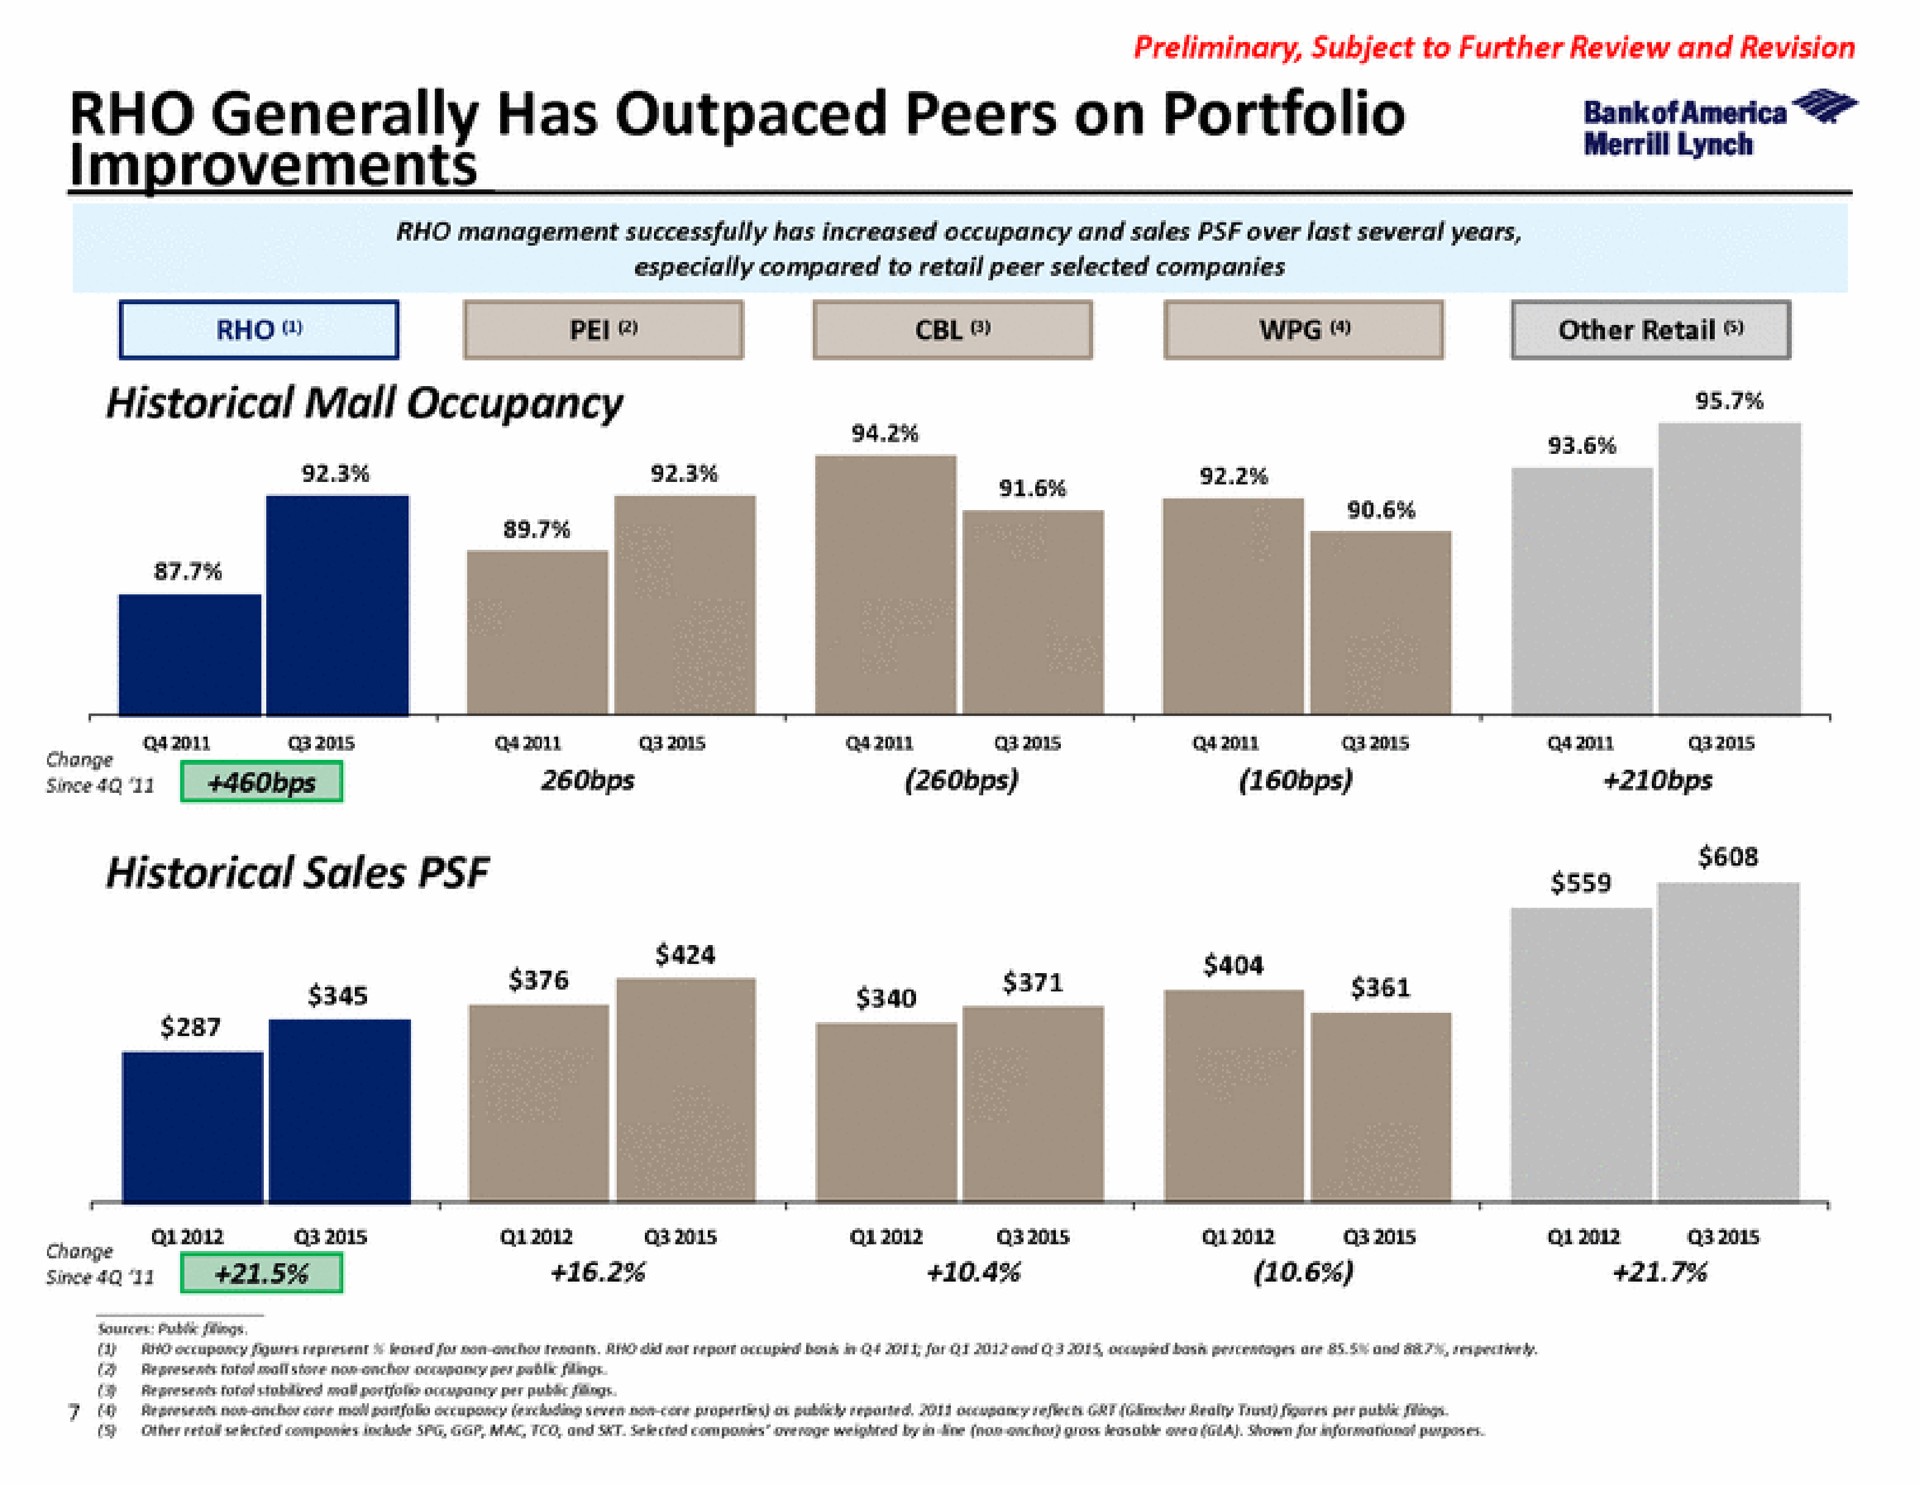 rho generally has outpaced peers on portfolio improvements historical mall occupancy omer historical sales gong | Bank of America